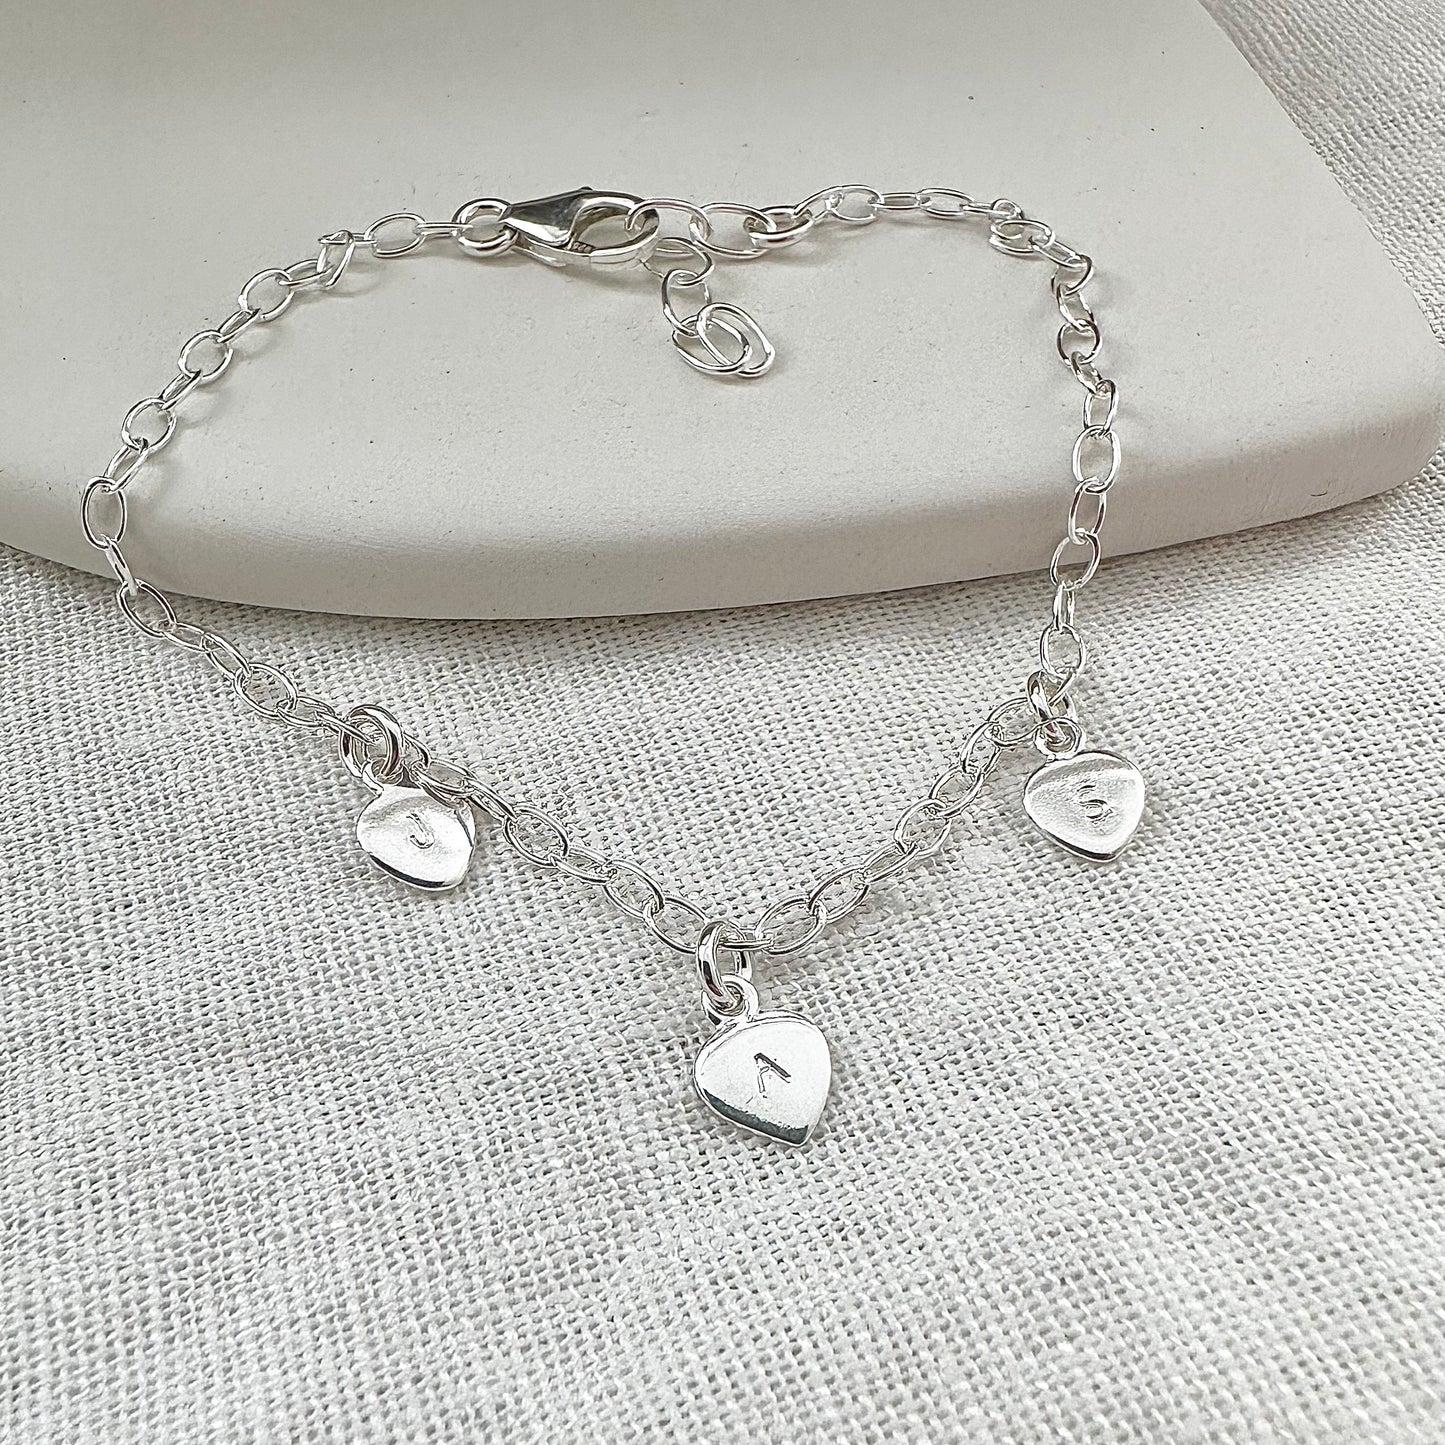 Mothers Day Gift For Women Family Initials Bracelet in Sterling Silver Chain, Minimalist Jewellery Gift for Her